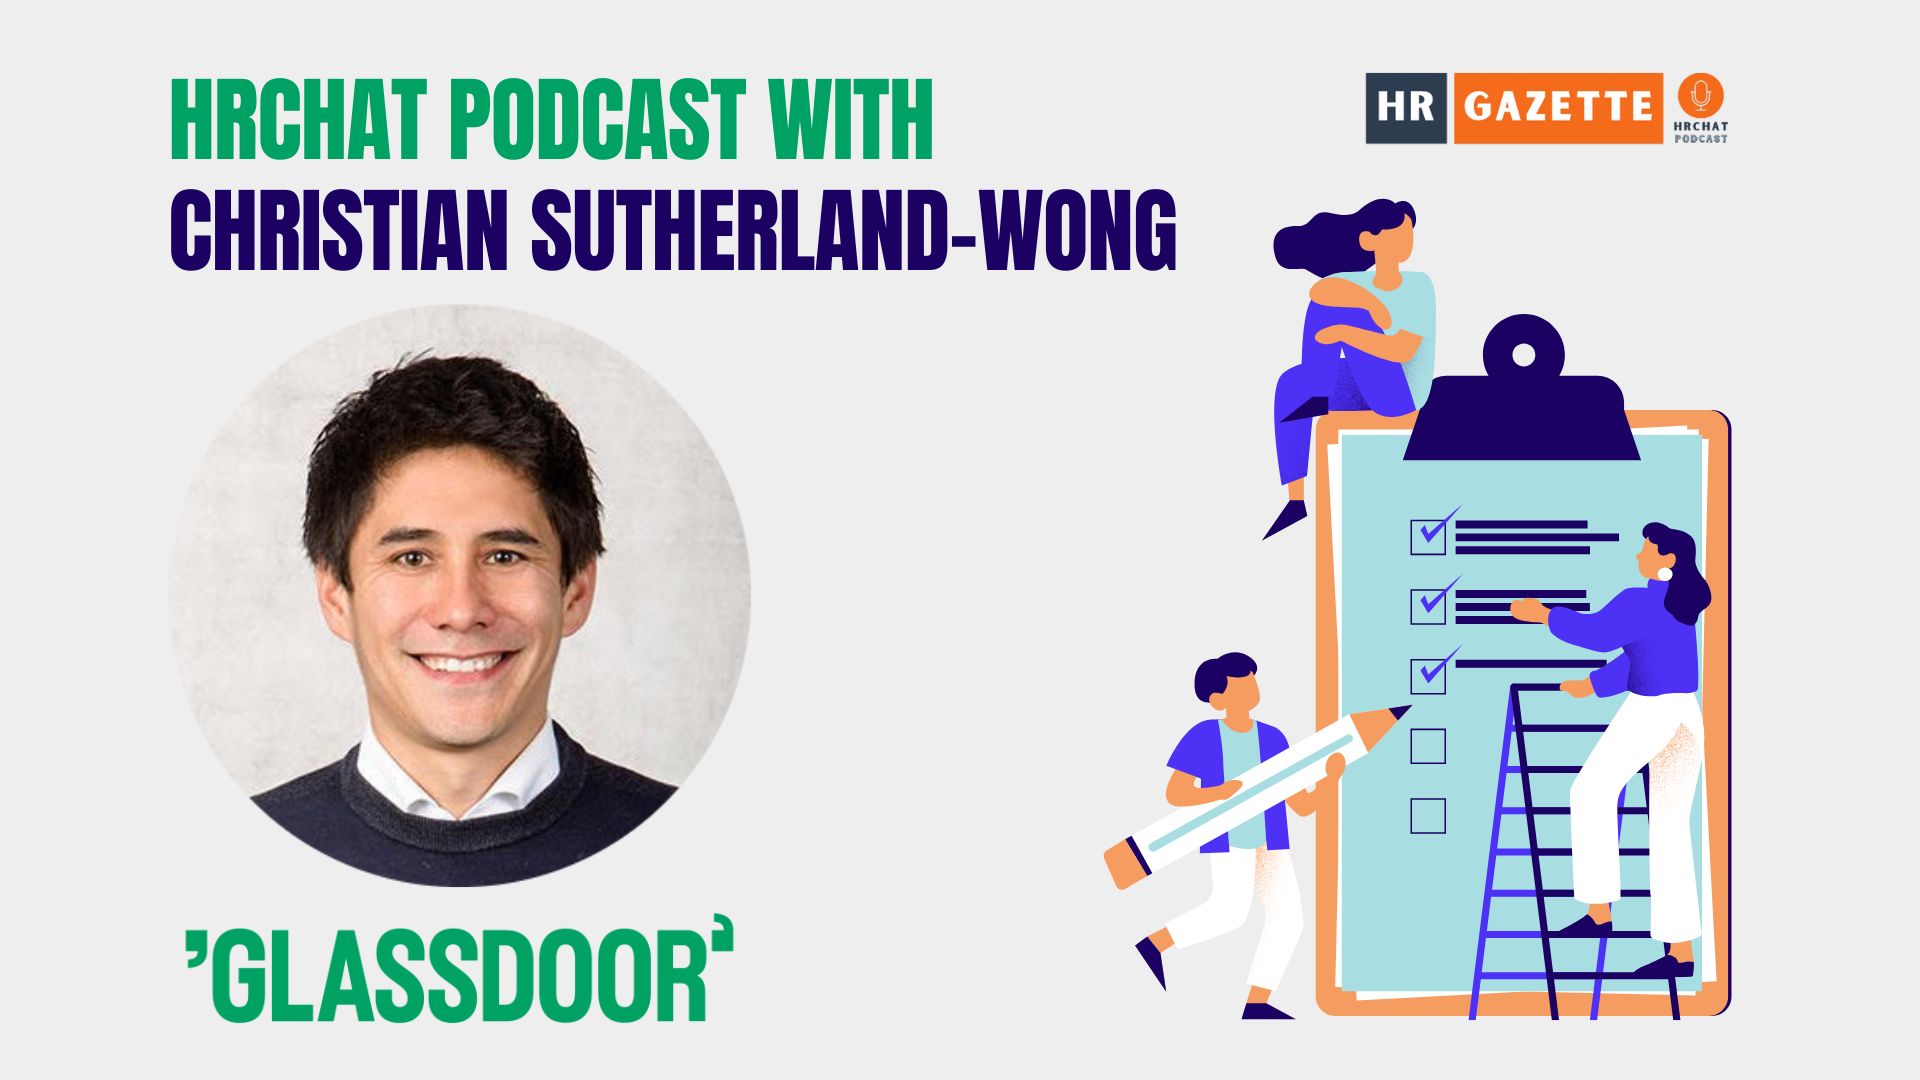 HRchat with Christian Sutherland-Wong, Glassdoor